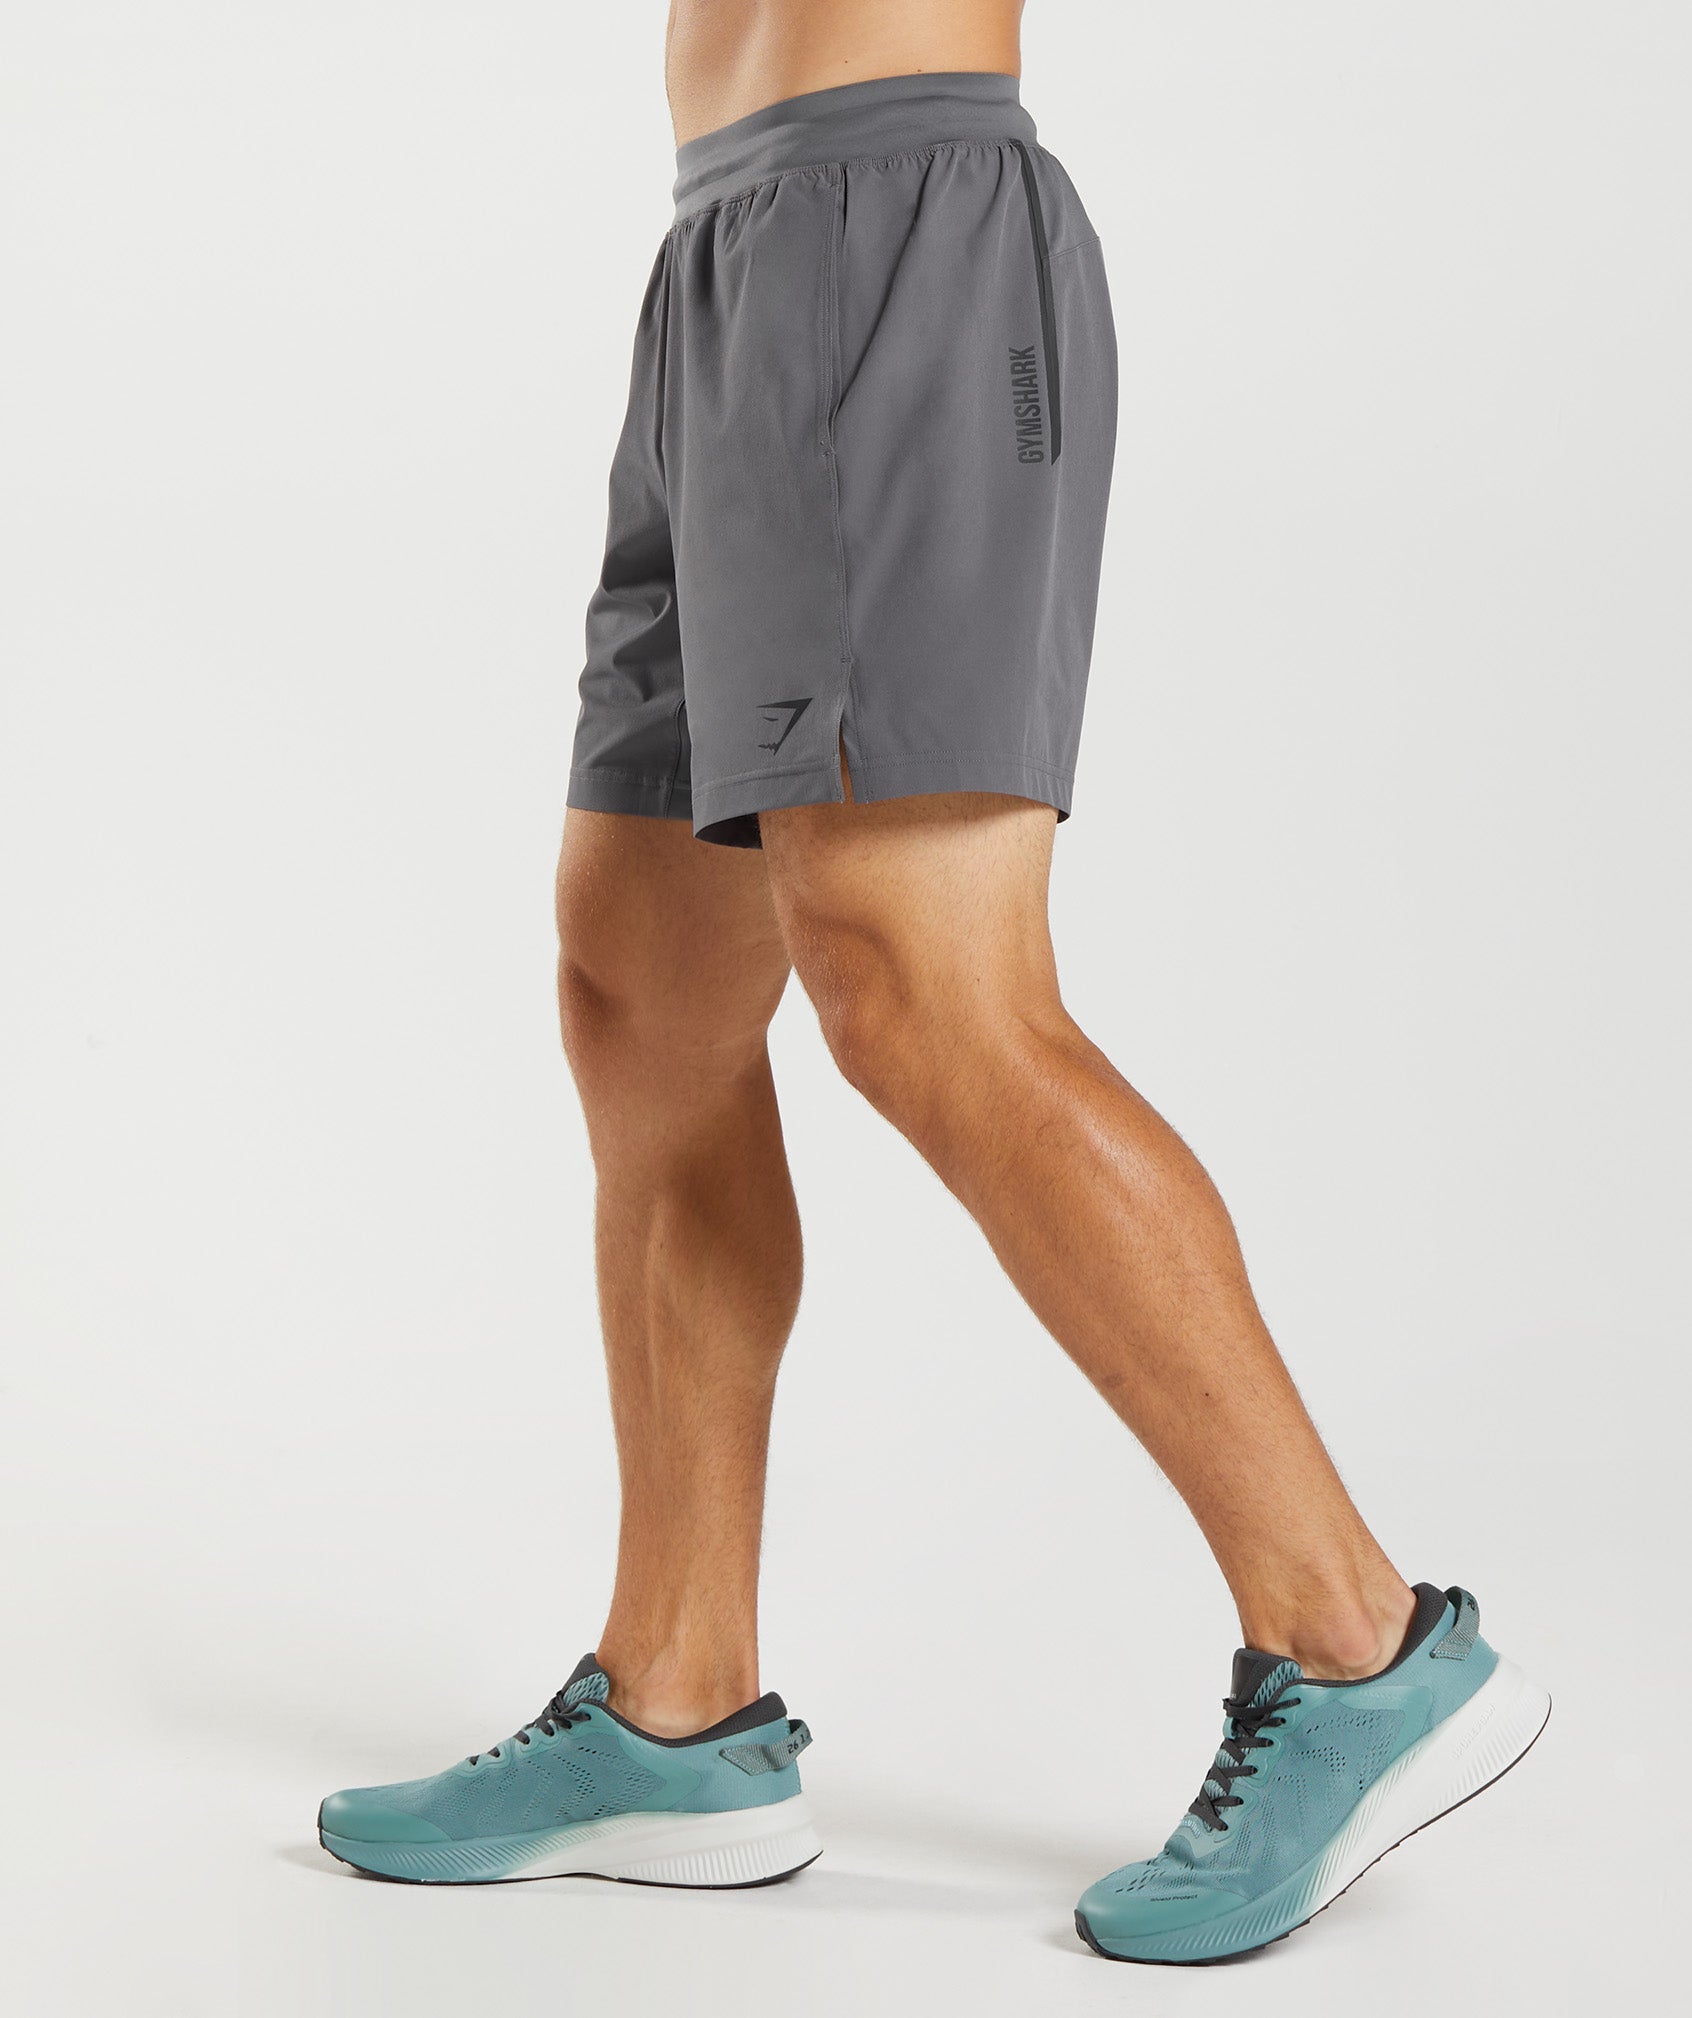 Apex 8" Function Shorts in Silhouette Grey - view 3